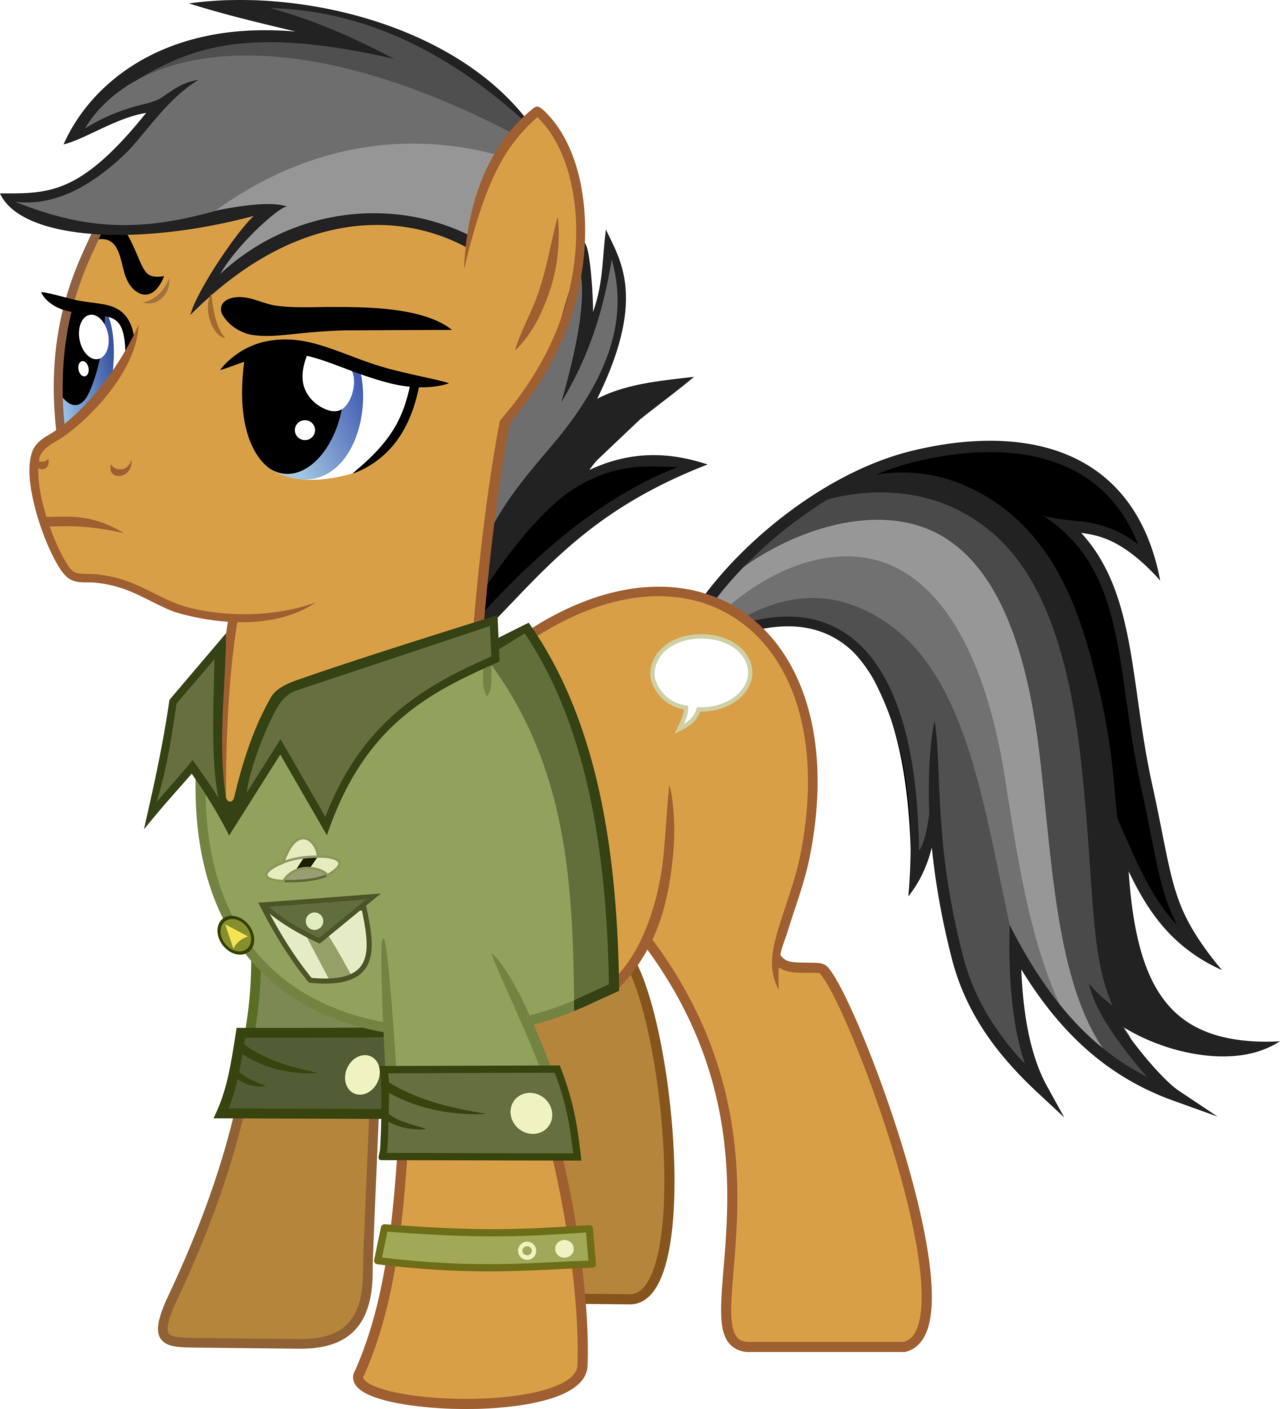 quibble_pants__2_vector_by_pink1ejack-dabfejv.png